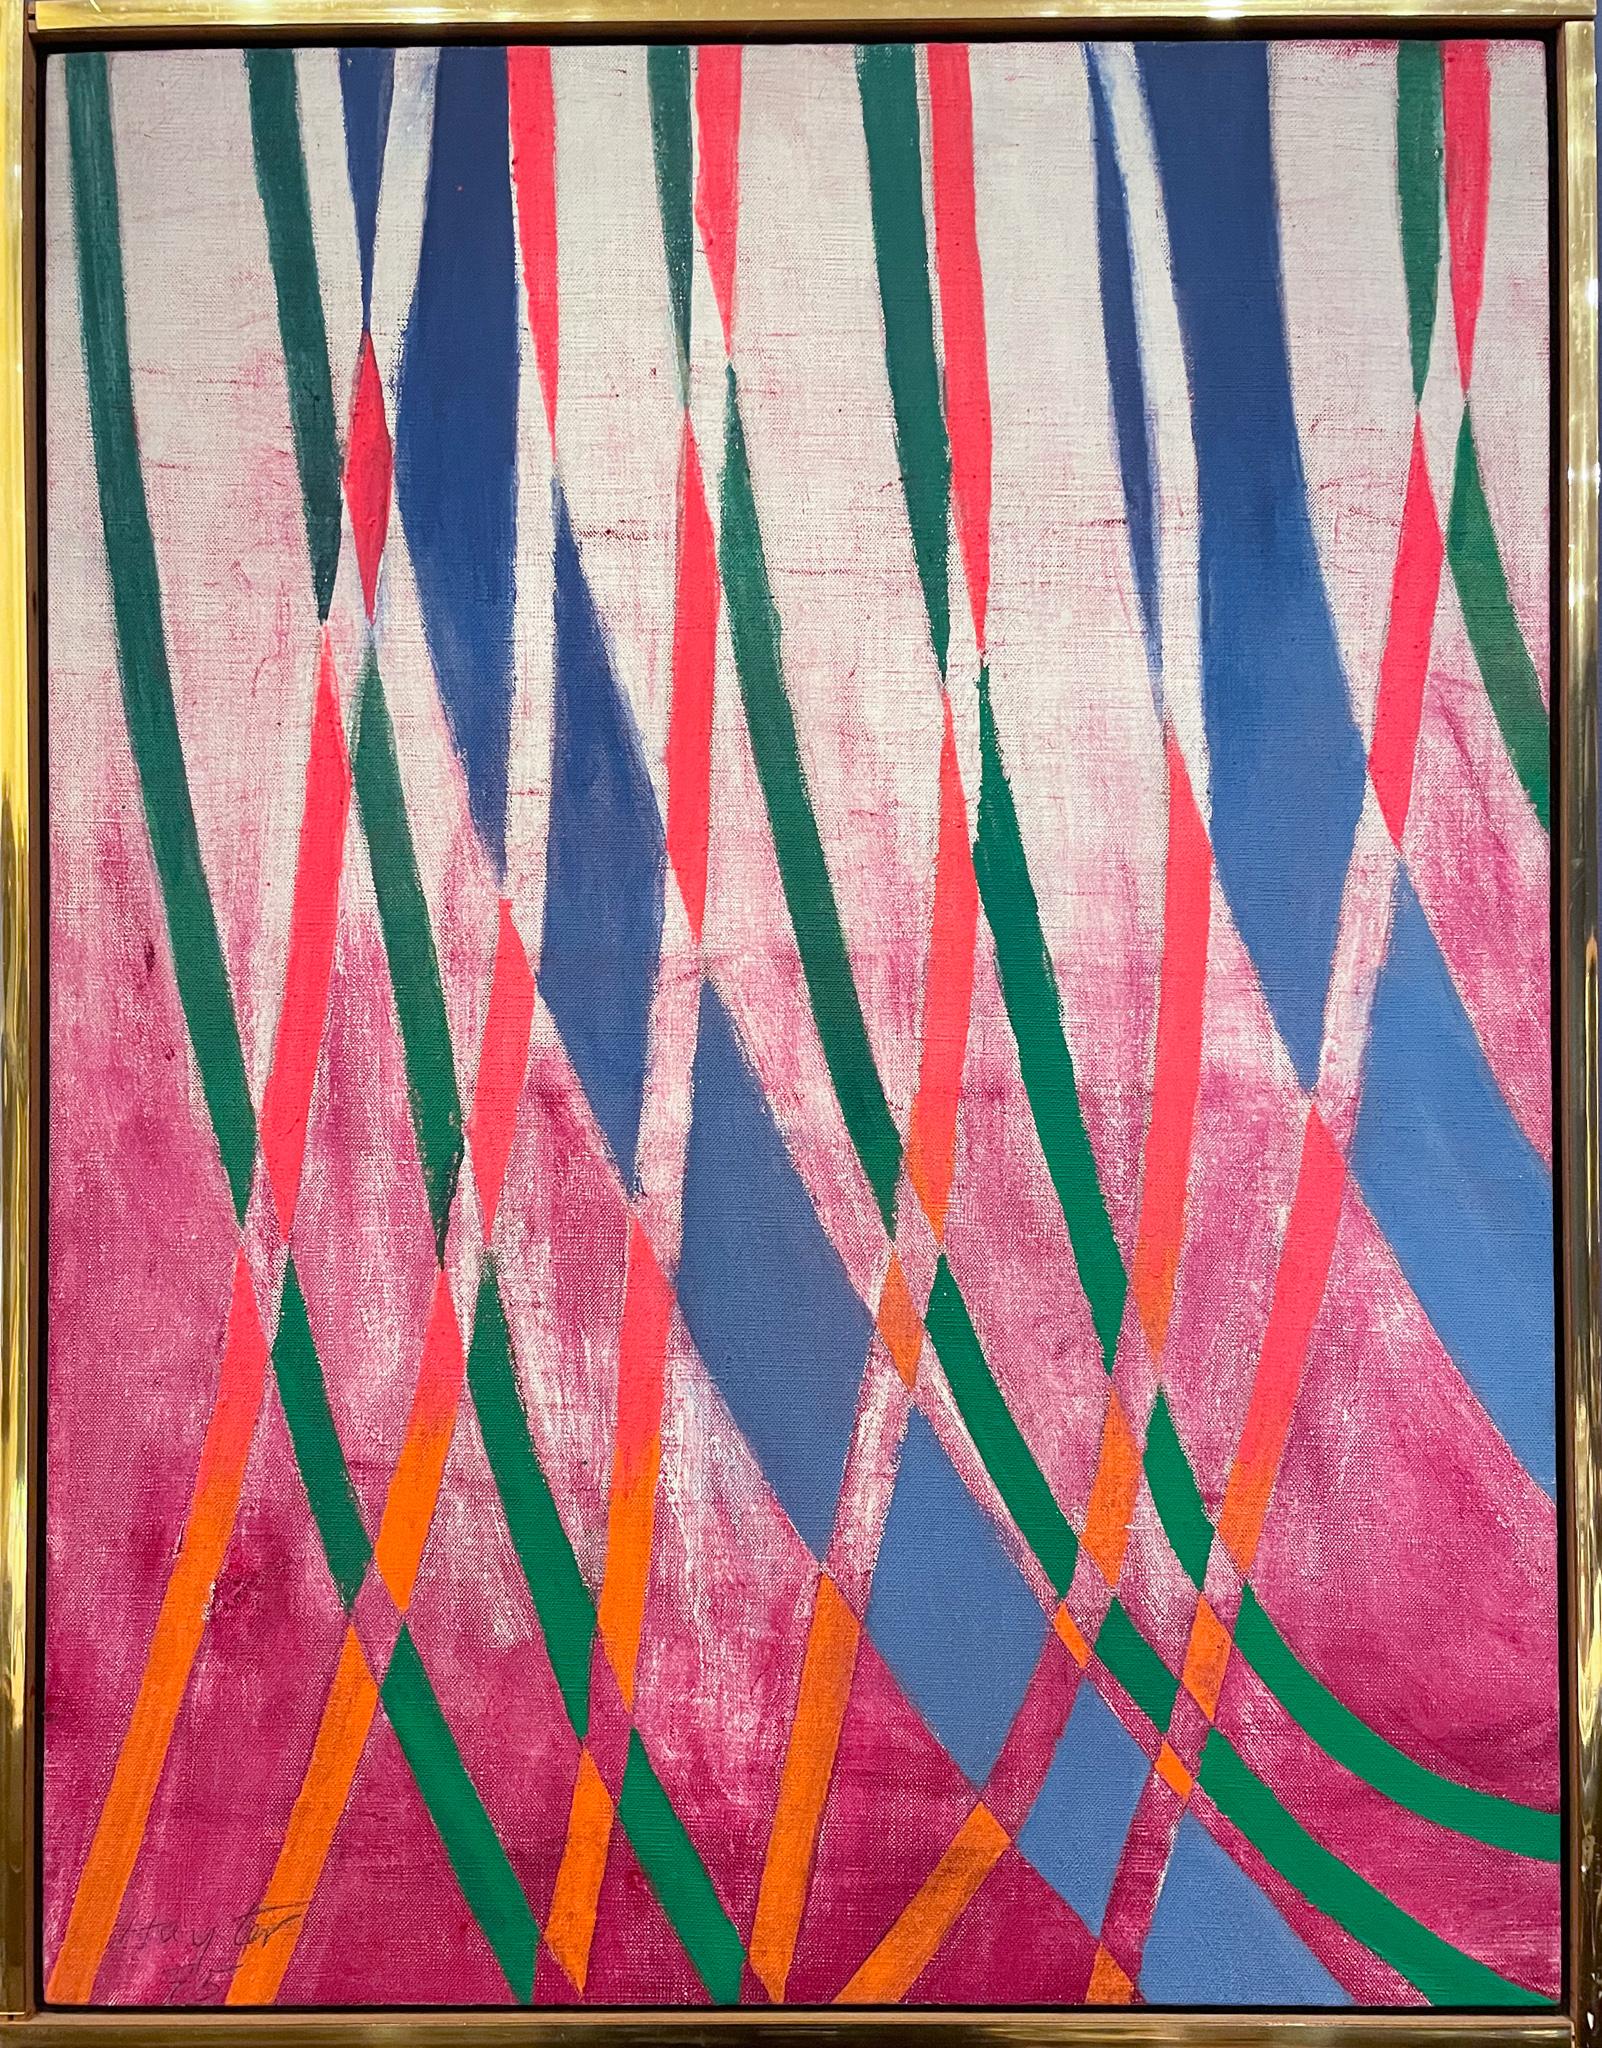 Curtain - Painting by Stanley William Hayter